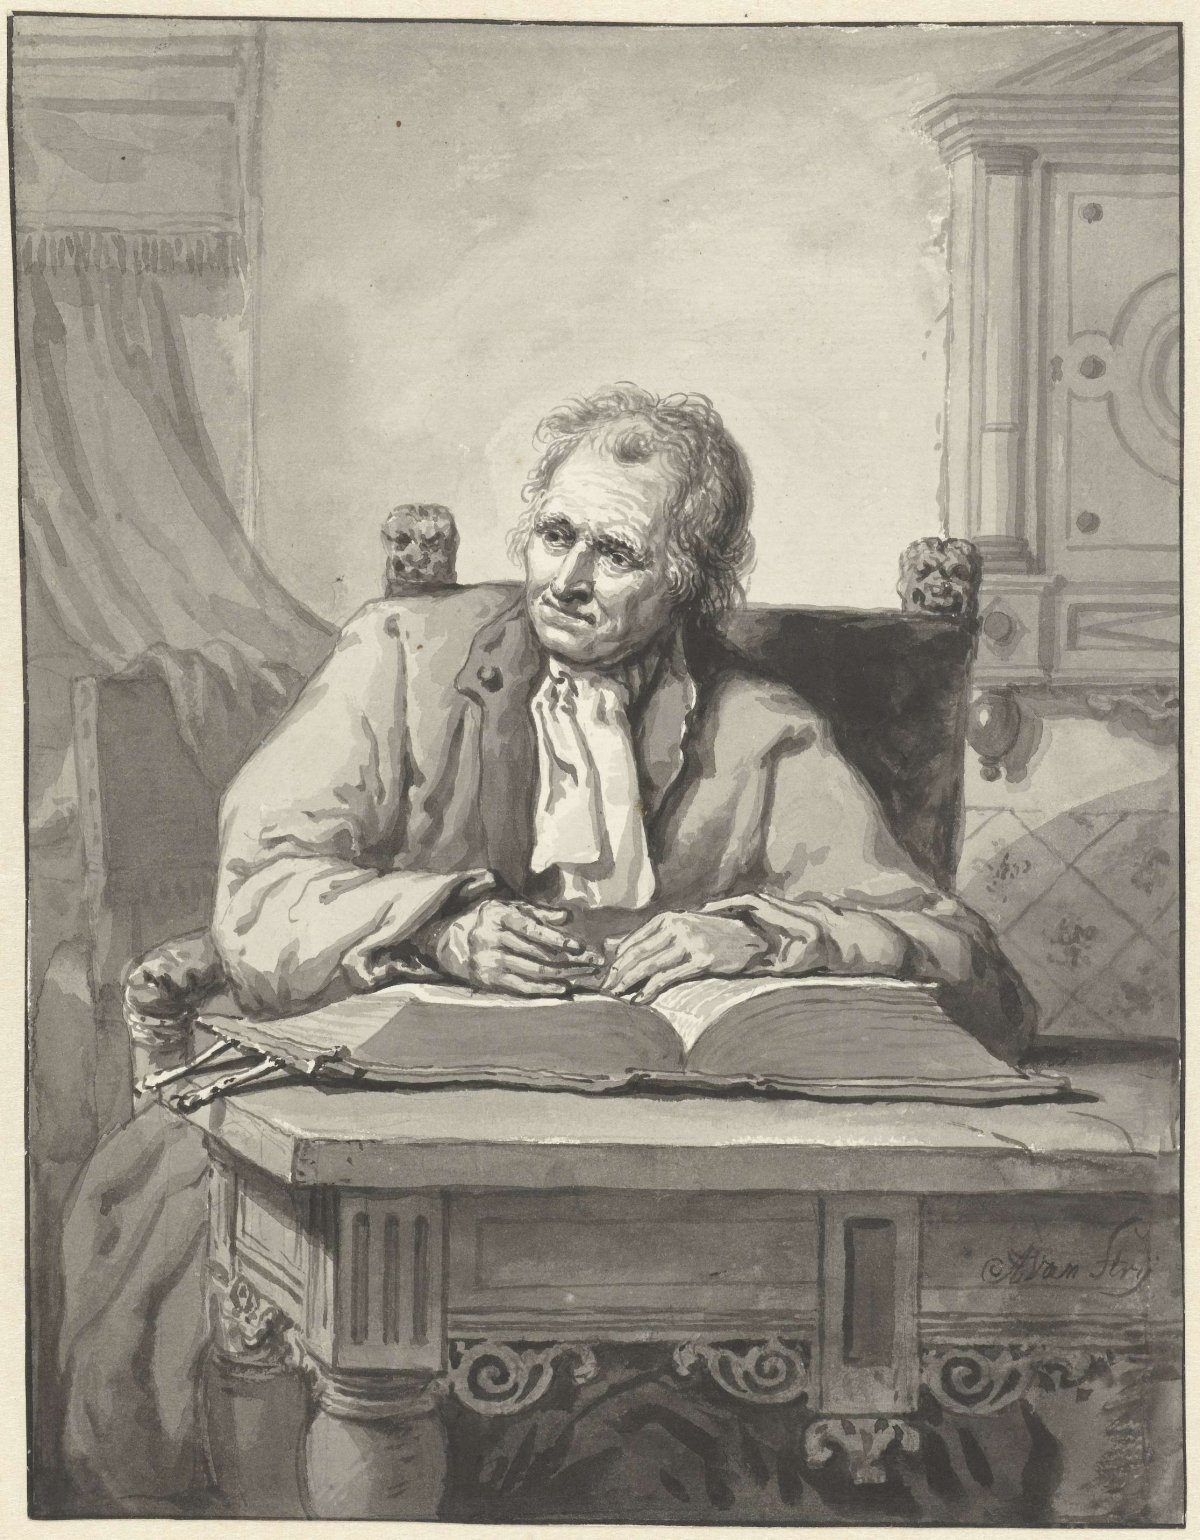 Seated man at a table with an open Bible, Abraham van Strij (I), 1787